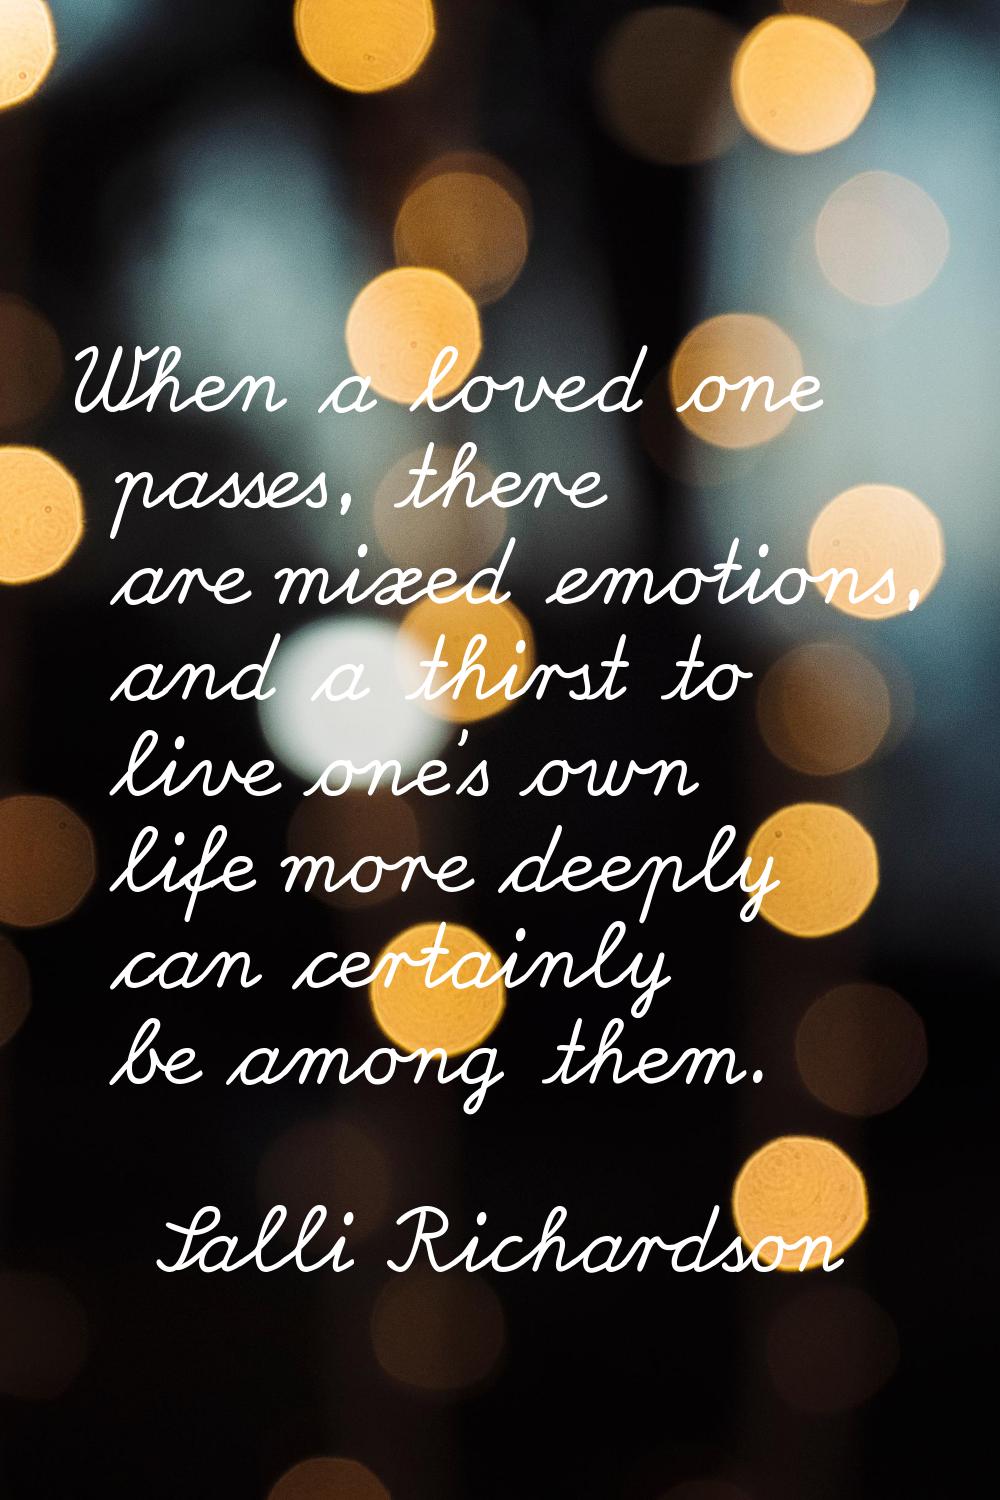 When a loved one passes, there are mixed emotions, and a thirst to live one's own life more deeply 